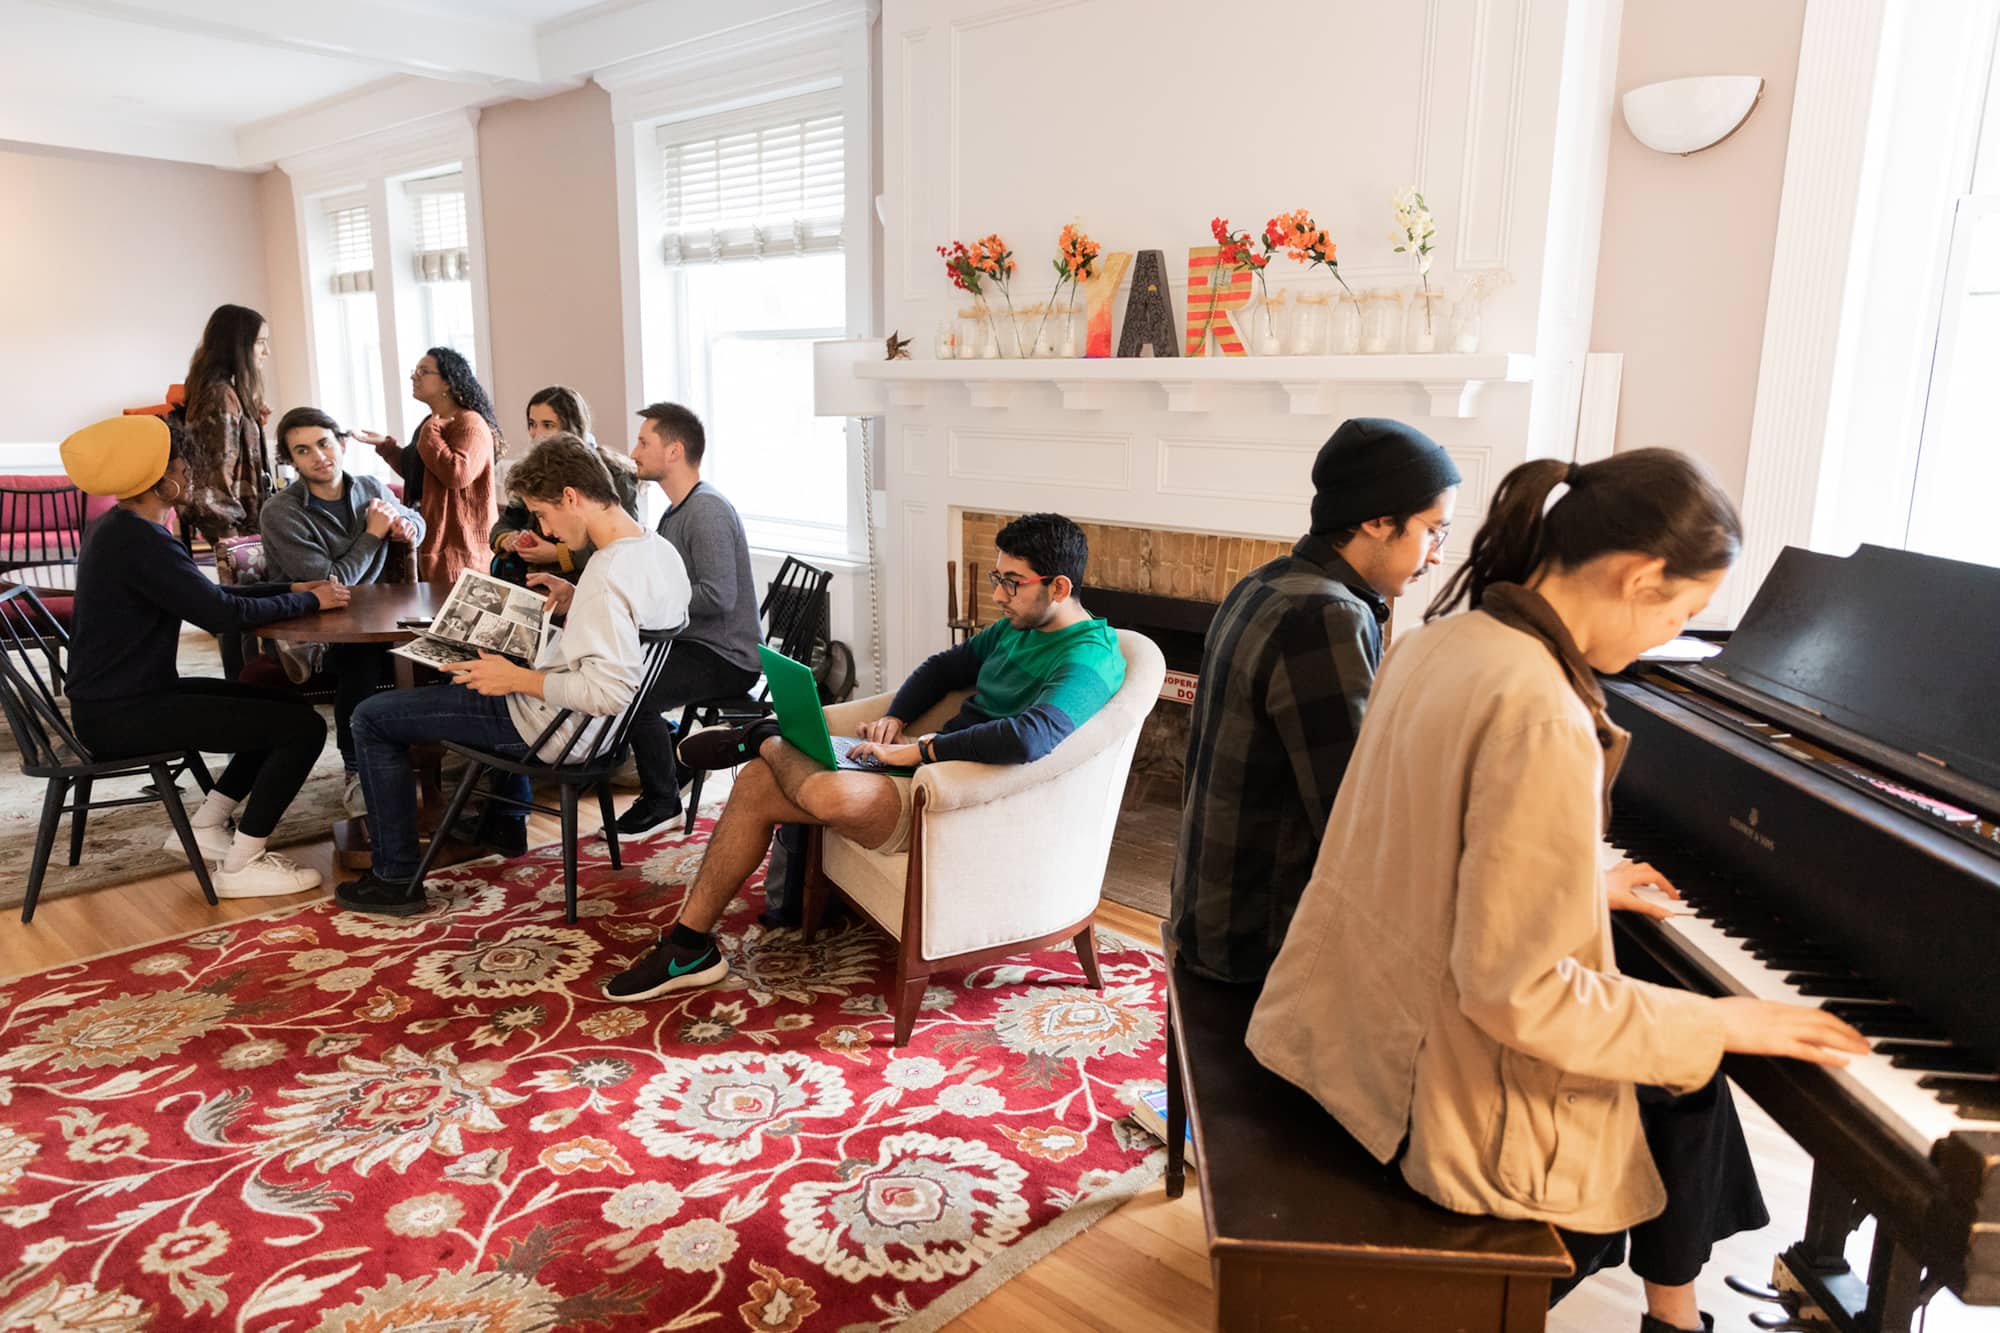 Students visting, reading, and playing piano in a residential common area